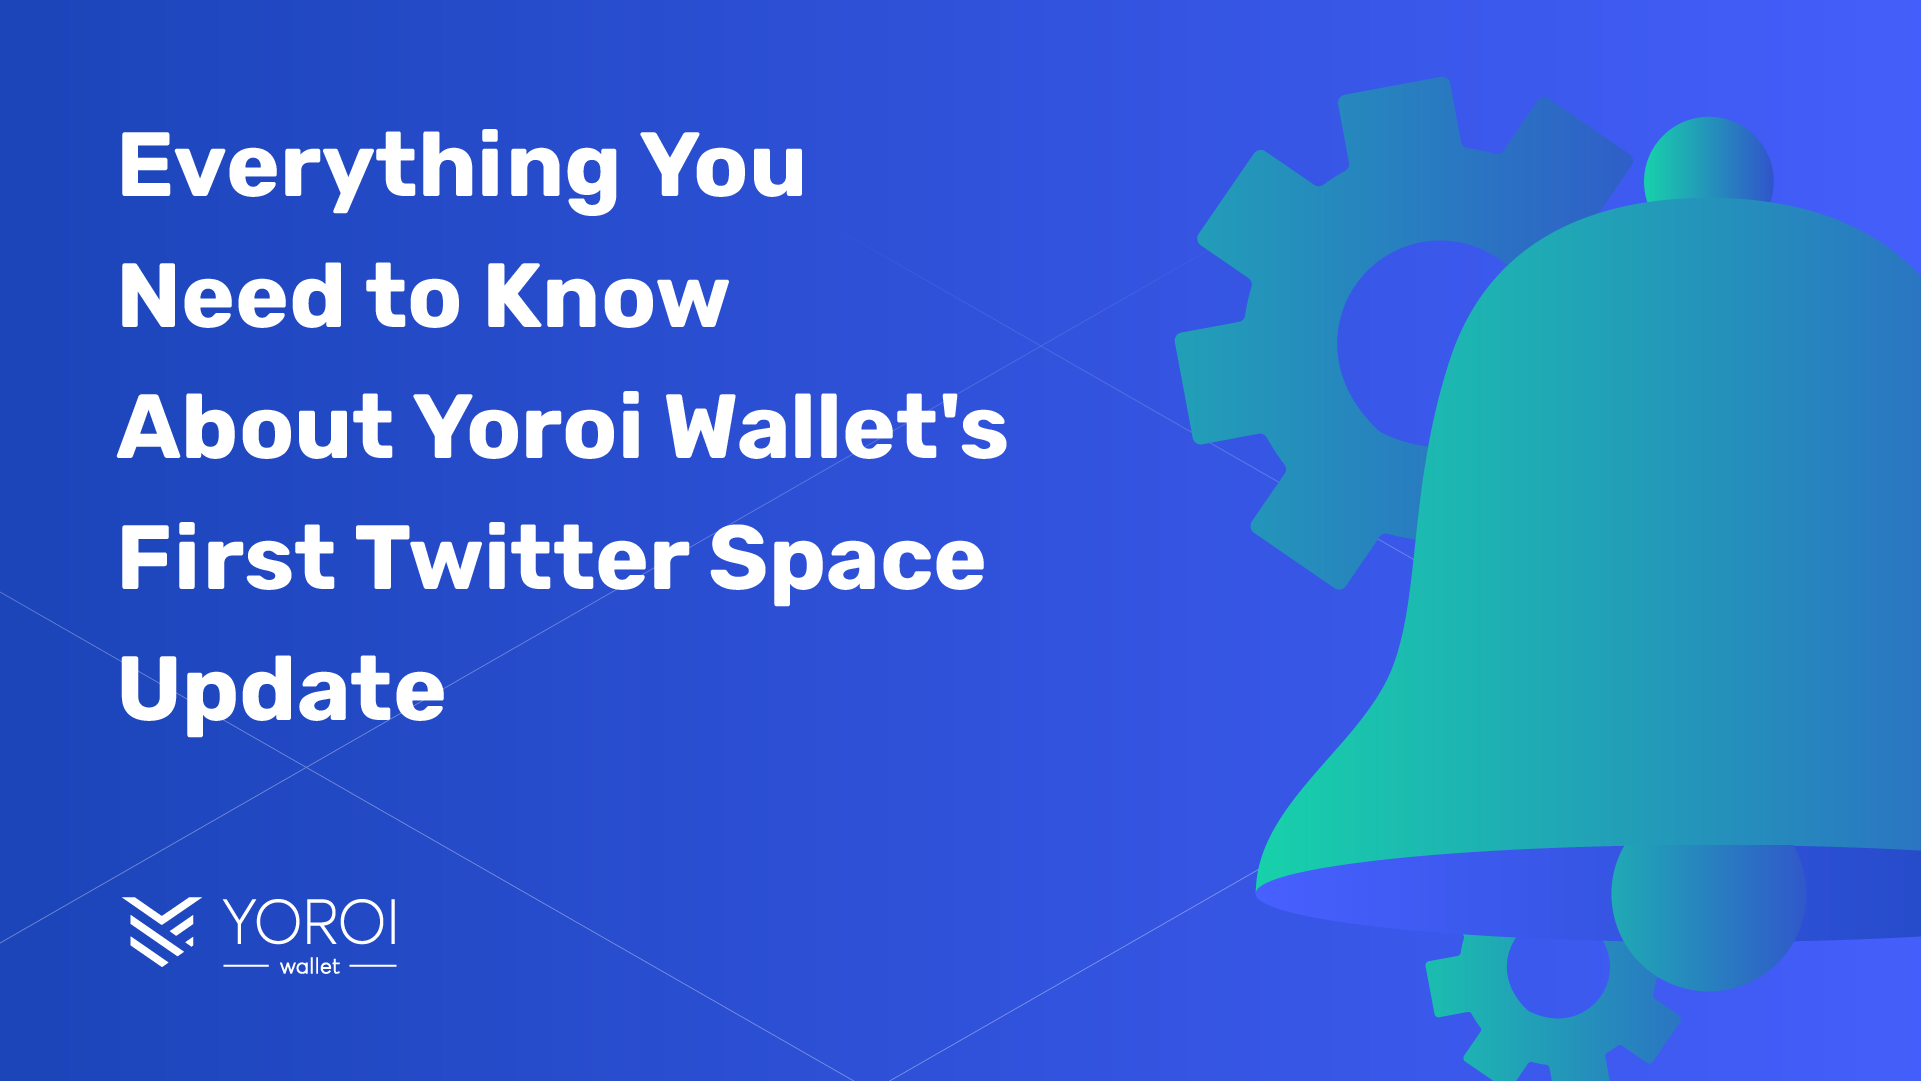 Everything-You-Need-to-Know-About-Yoroi-Wallet-Twitter-Space-Update.png